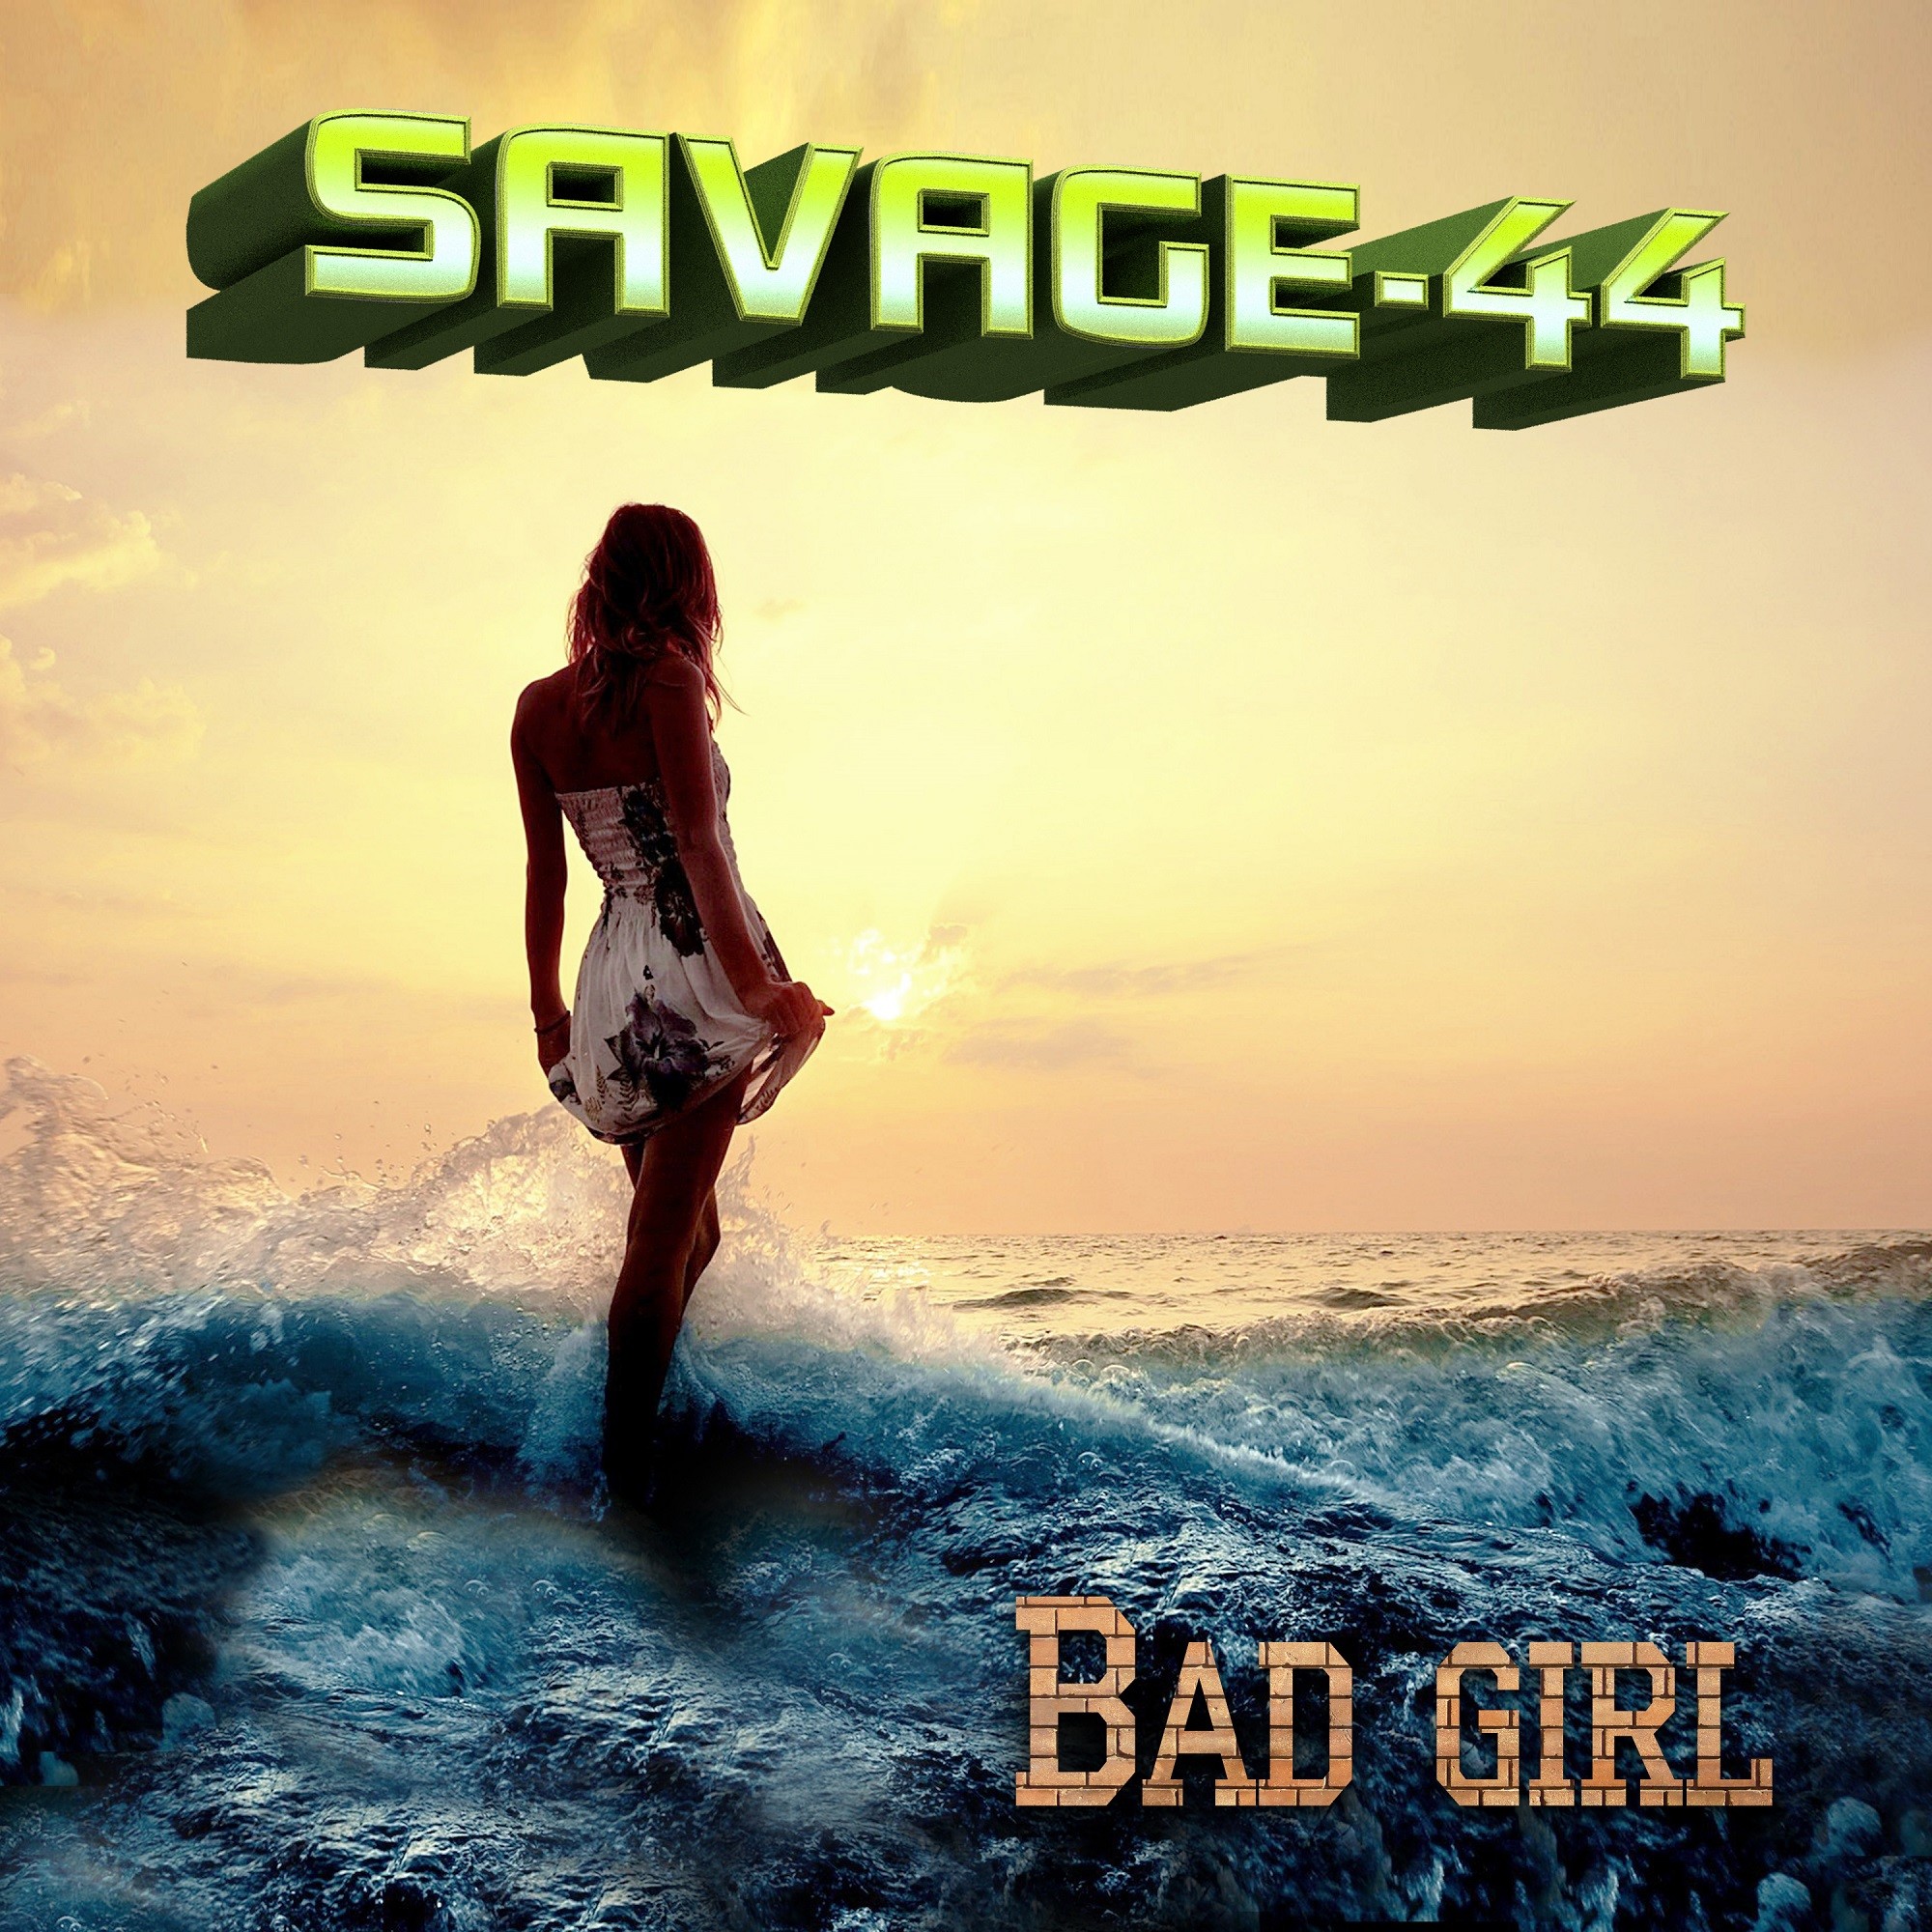 Savage 44 the music ring new